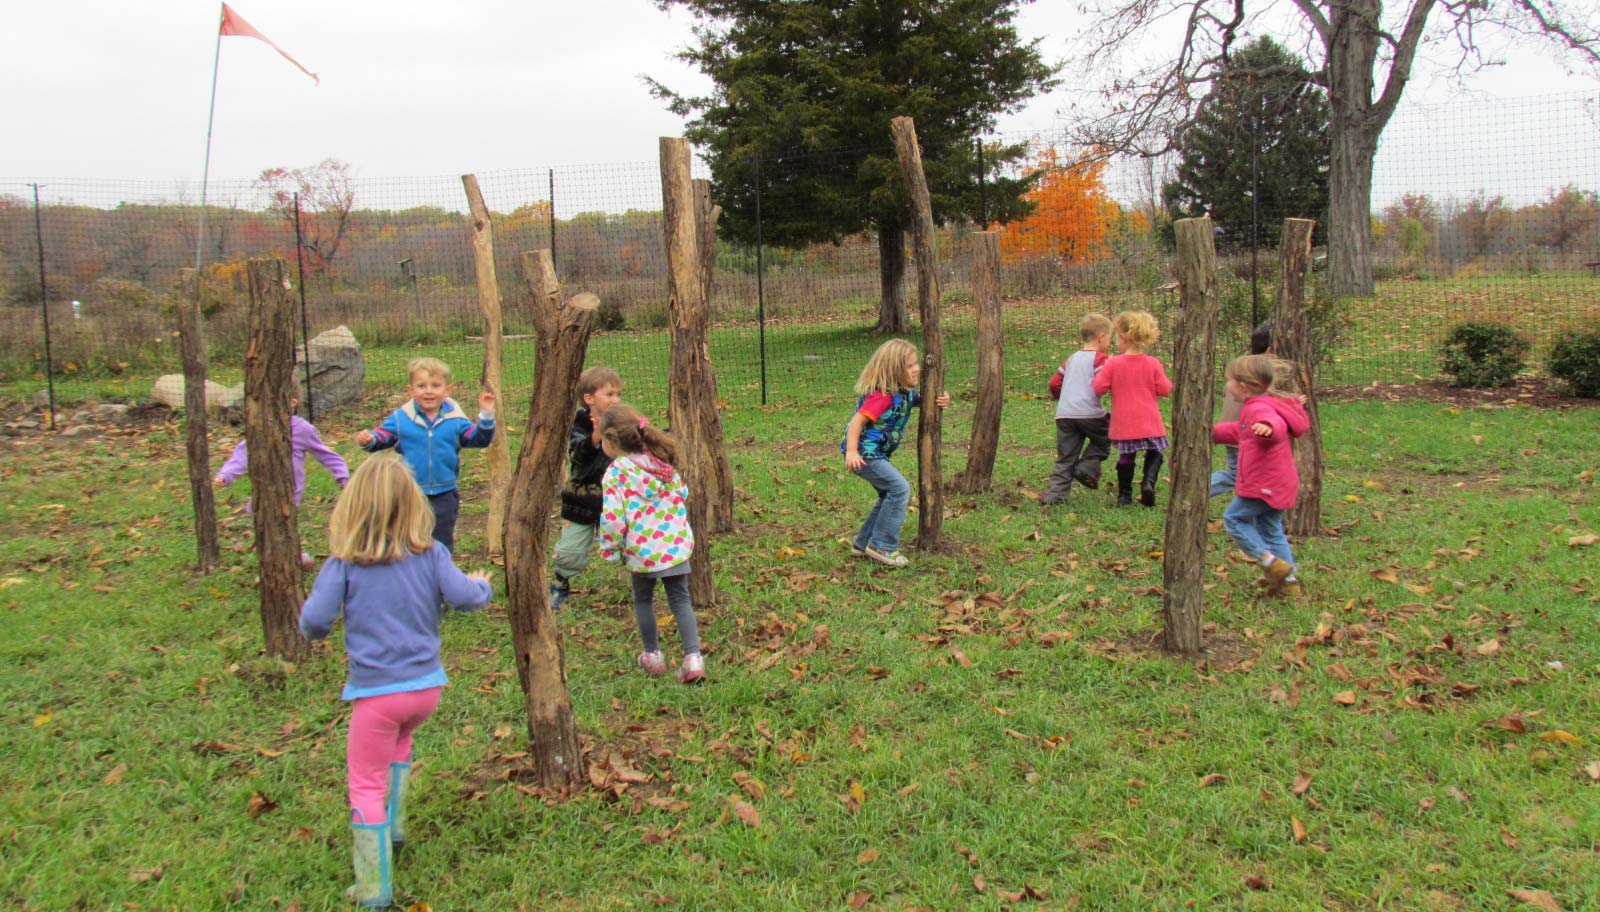 Grasshopper Grove Nature Play Area (Good for toddlers!)